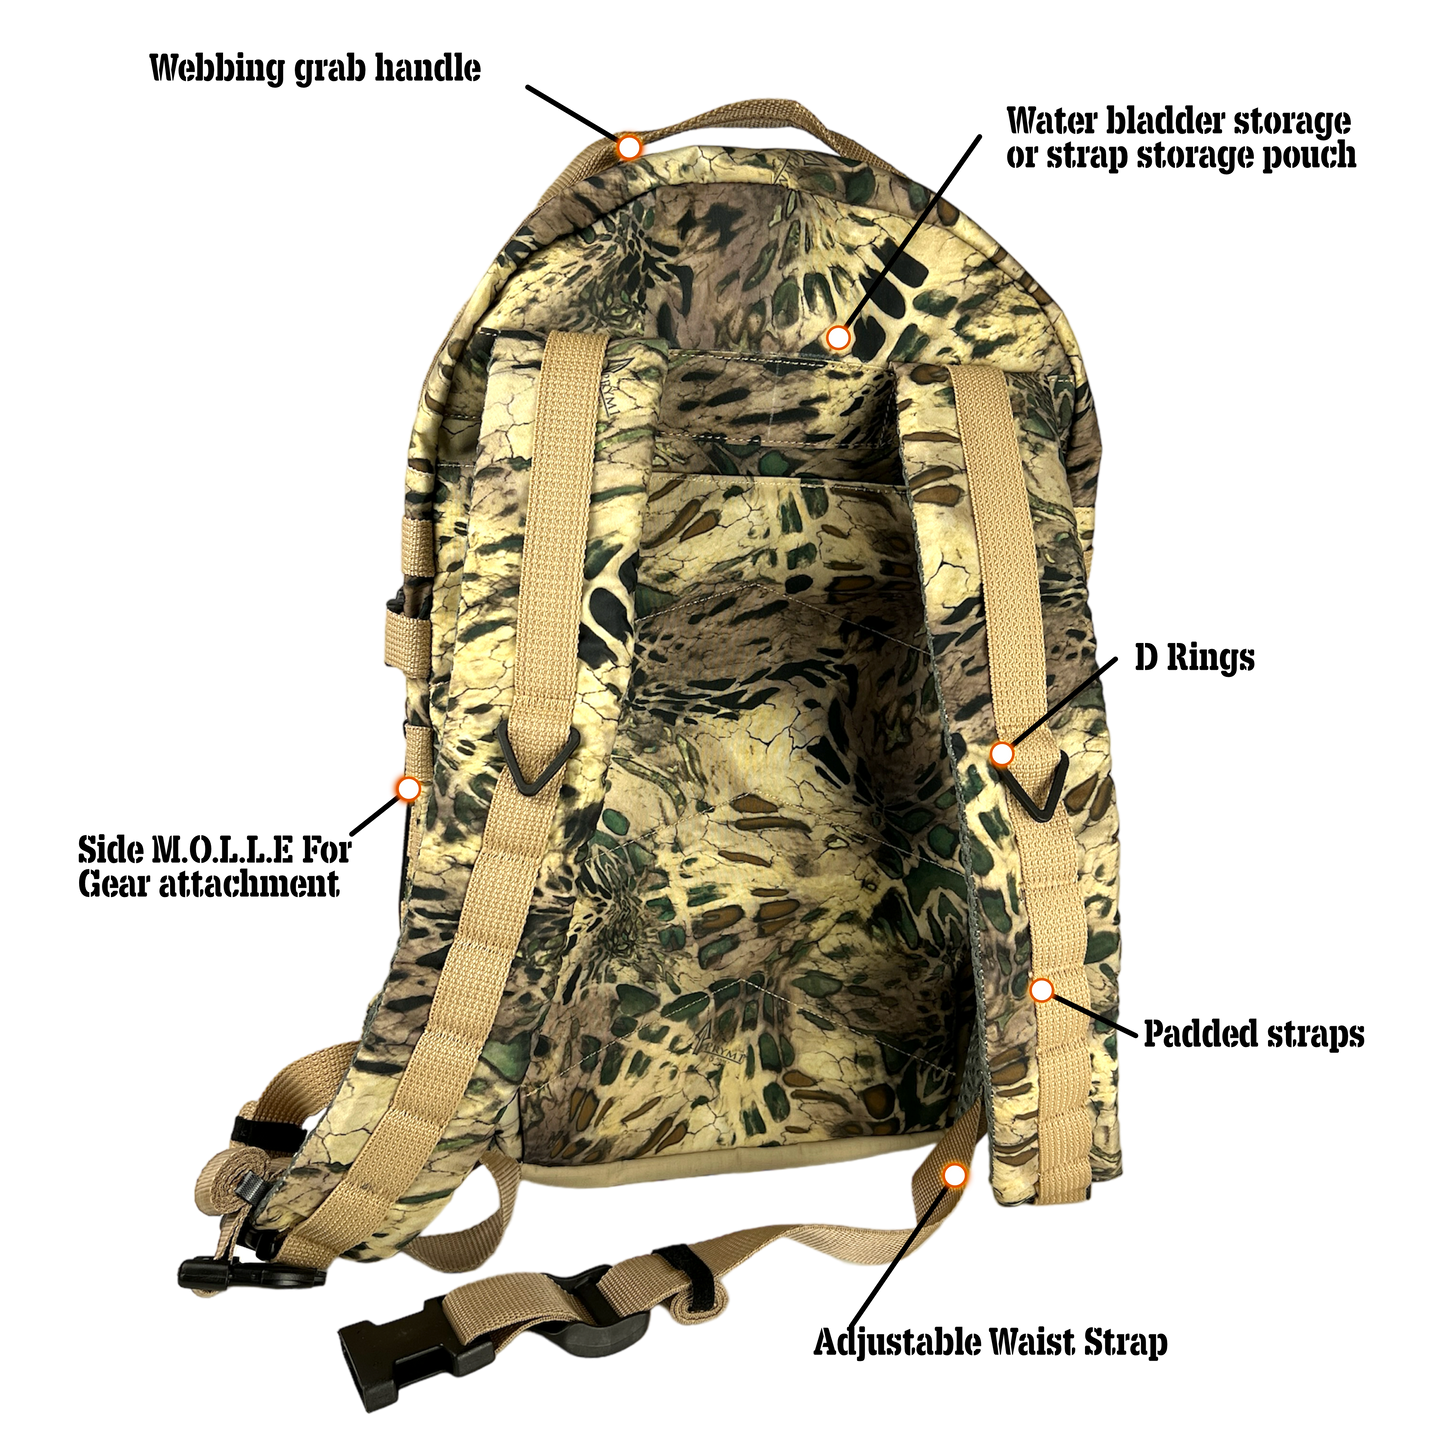 Recon Tactical backpack